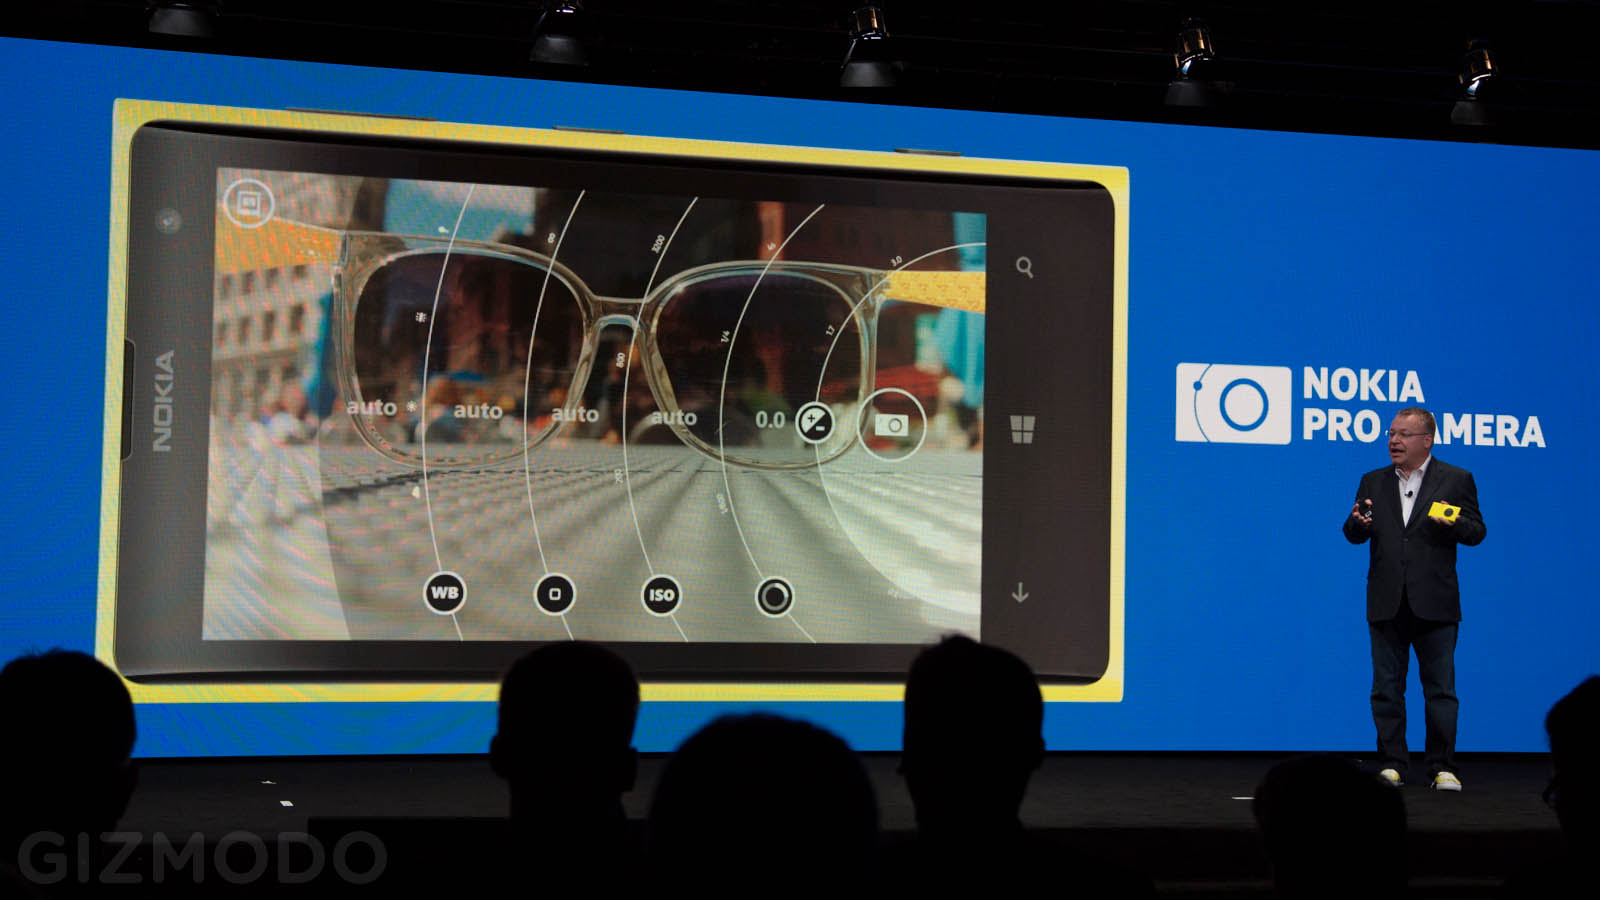 Nokia Lumia 1020: A Great Camera In A Real Phone